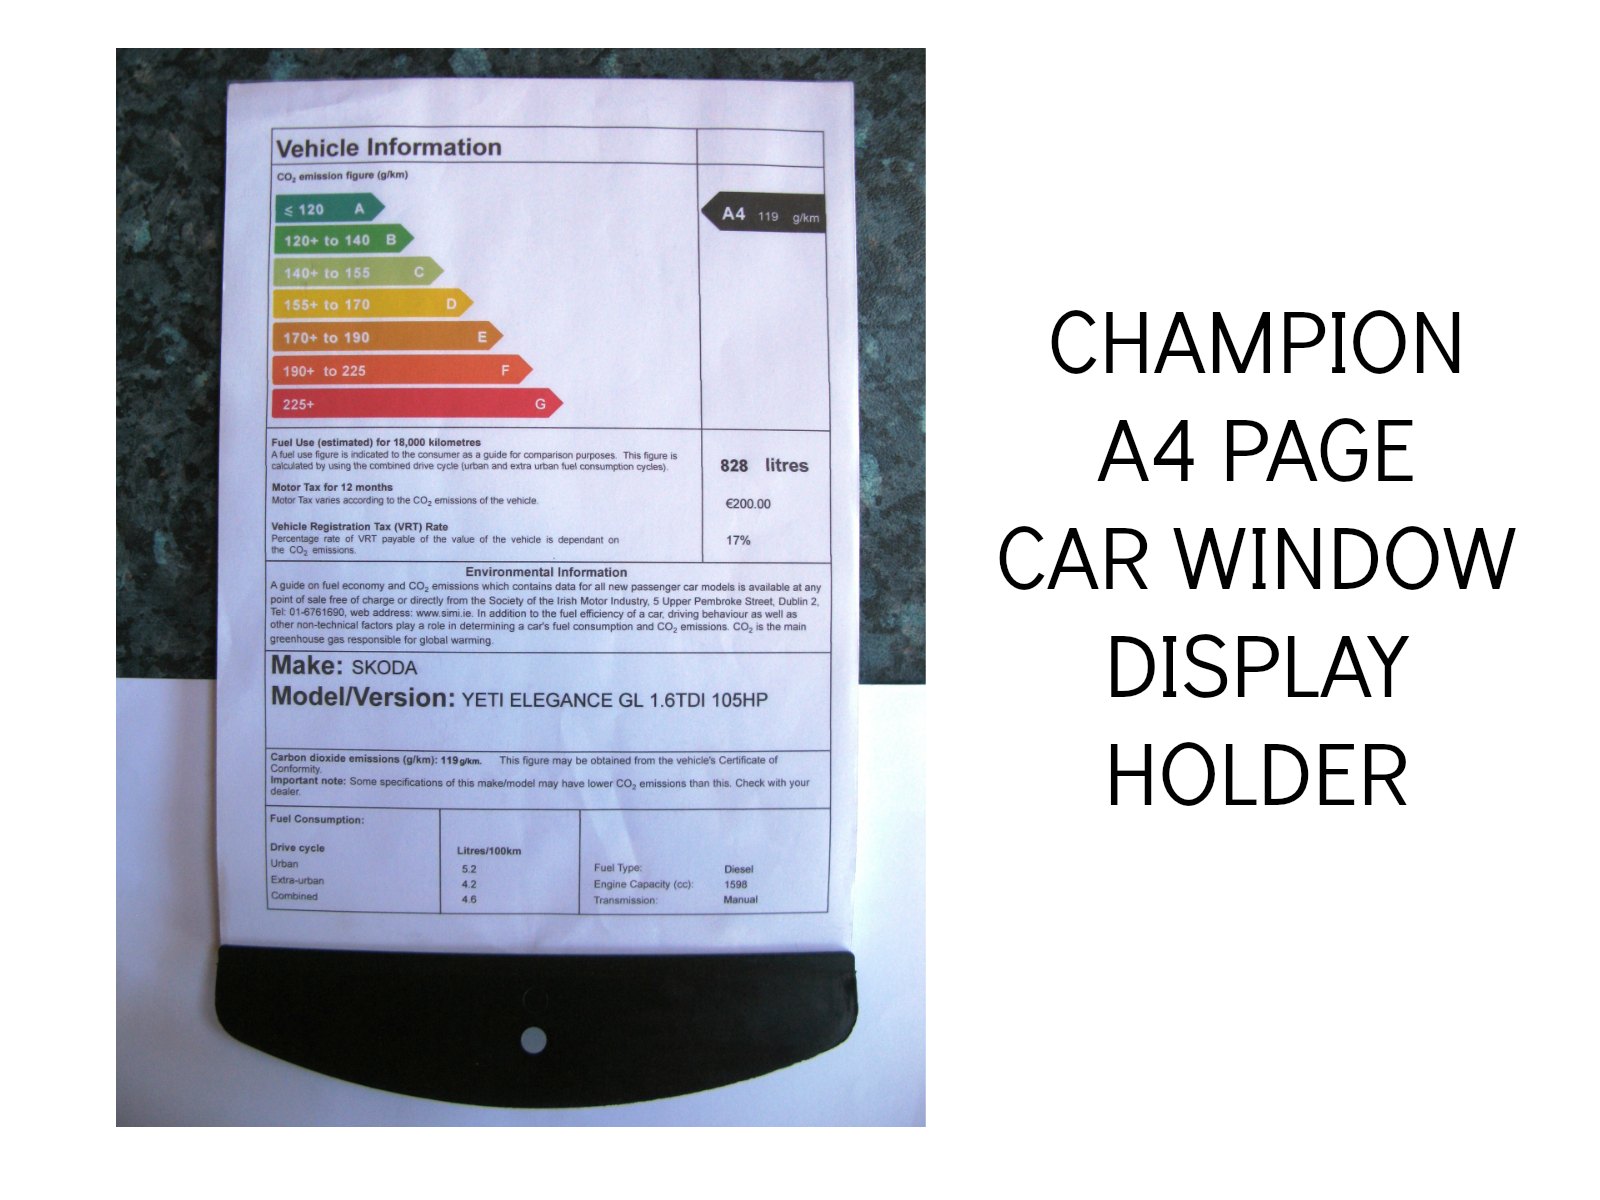 DISPLAY A4 PAGE IN CAR WINDOW, BLADE SPEC SHEET HOLDERS